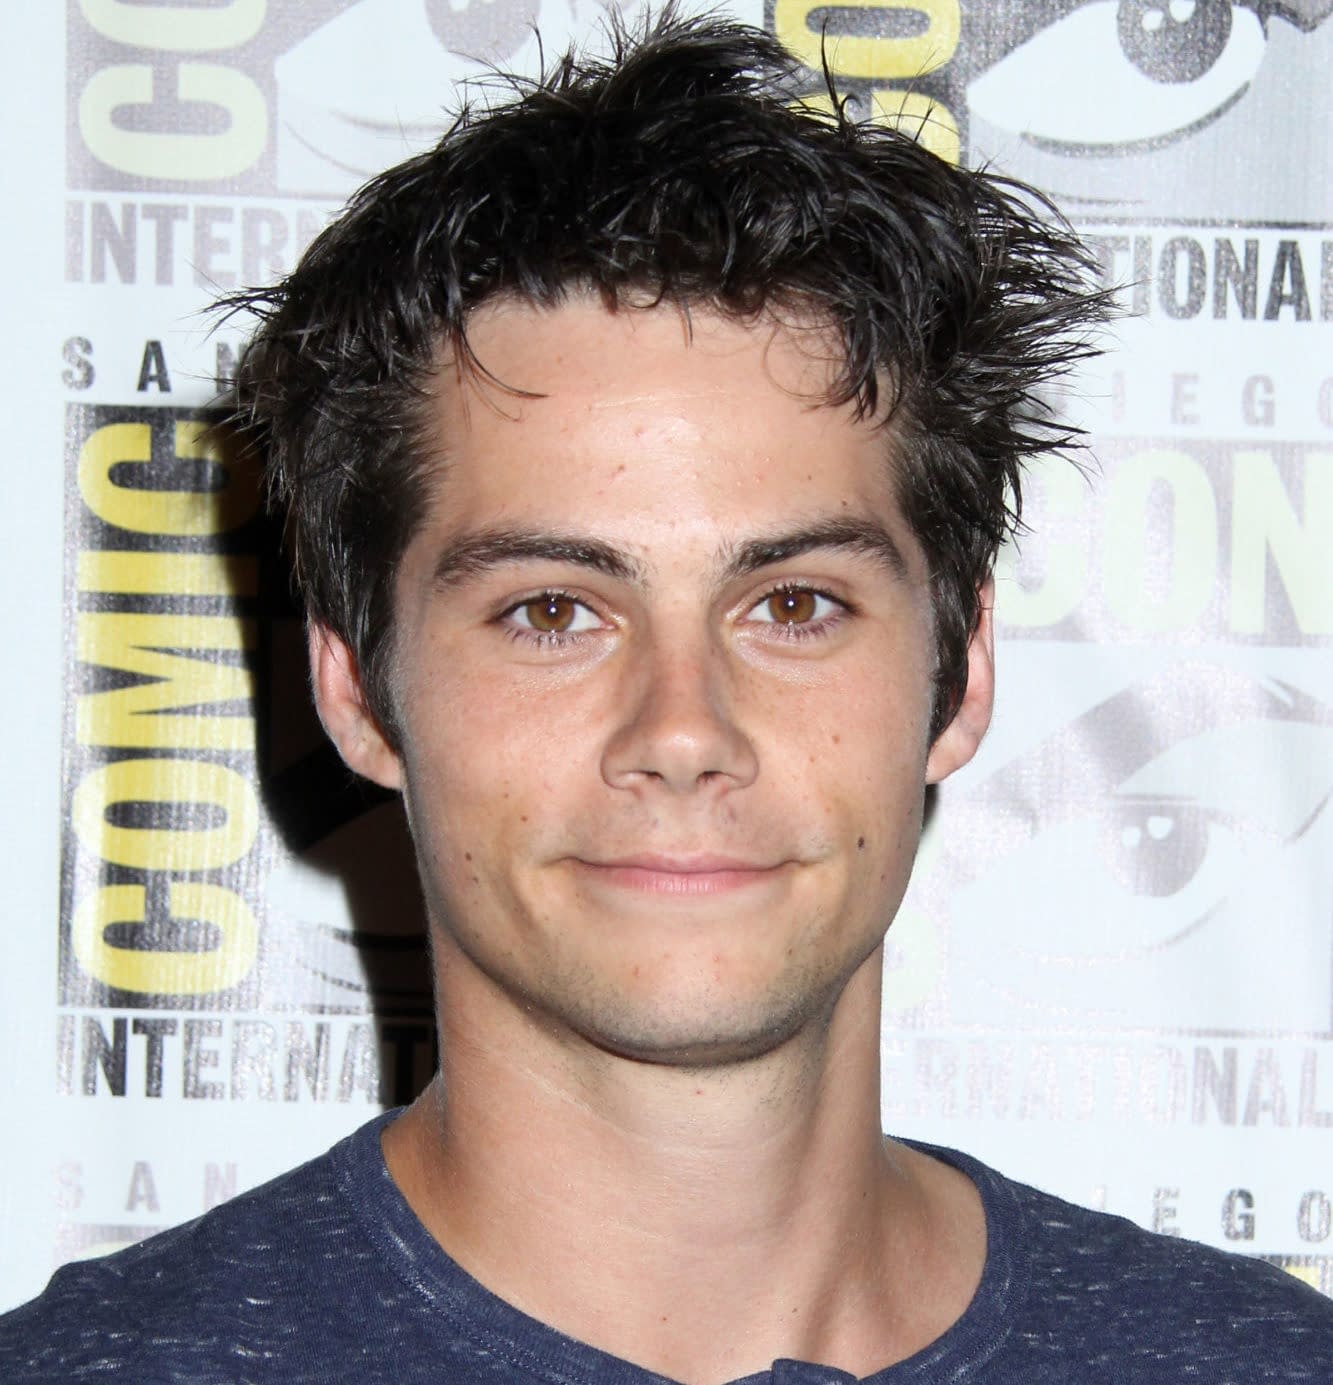 Dylan O'Brien to Voice Bumblebee in the Upcoming Prequel Movie